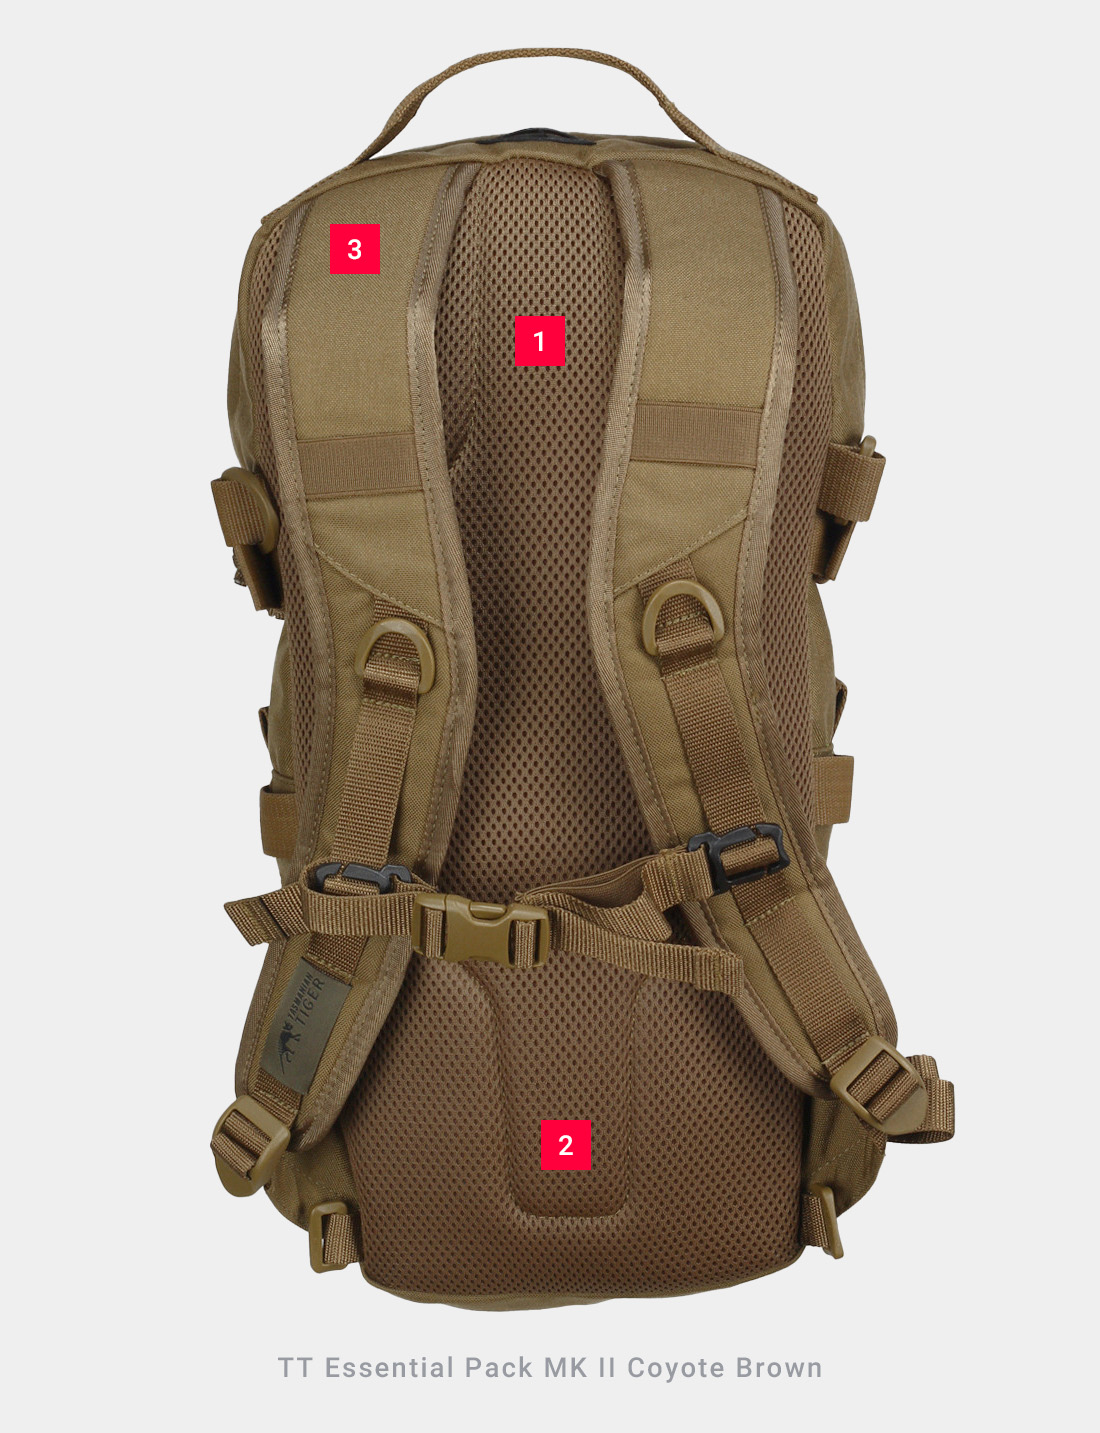 TT Essential Pack MK II Coyote Brown - Thermo Mold Airmesh Rückensystem